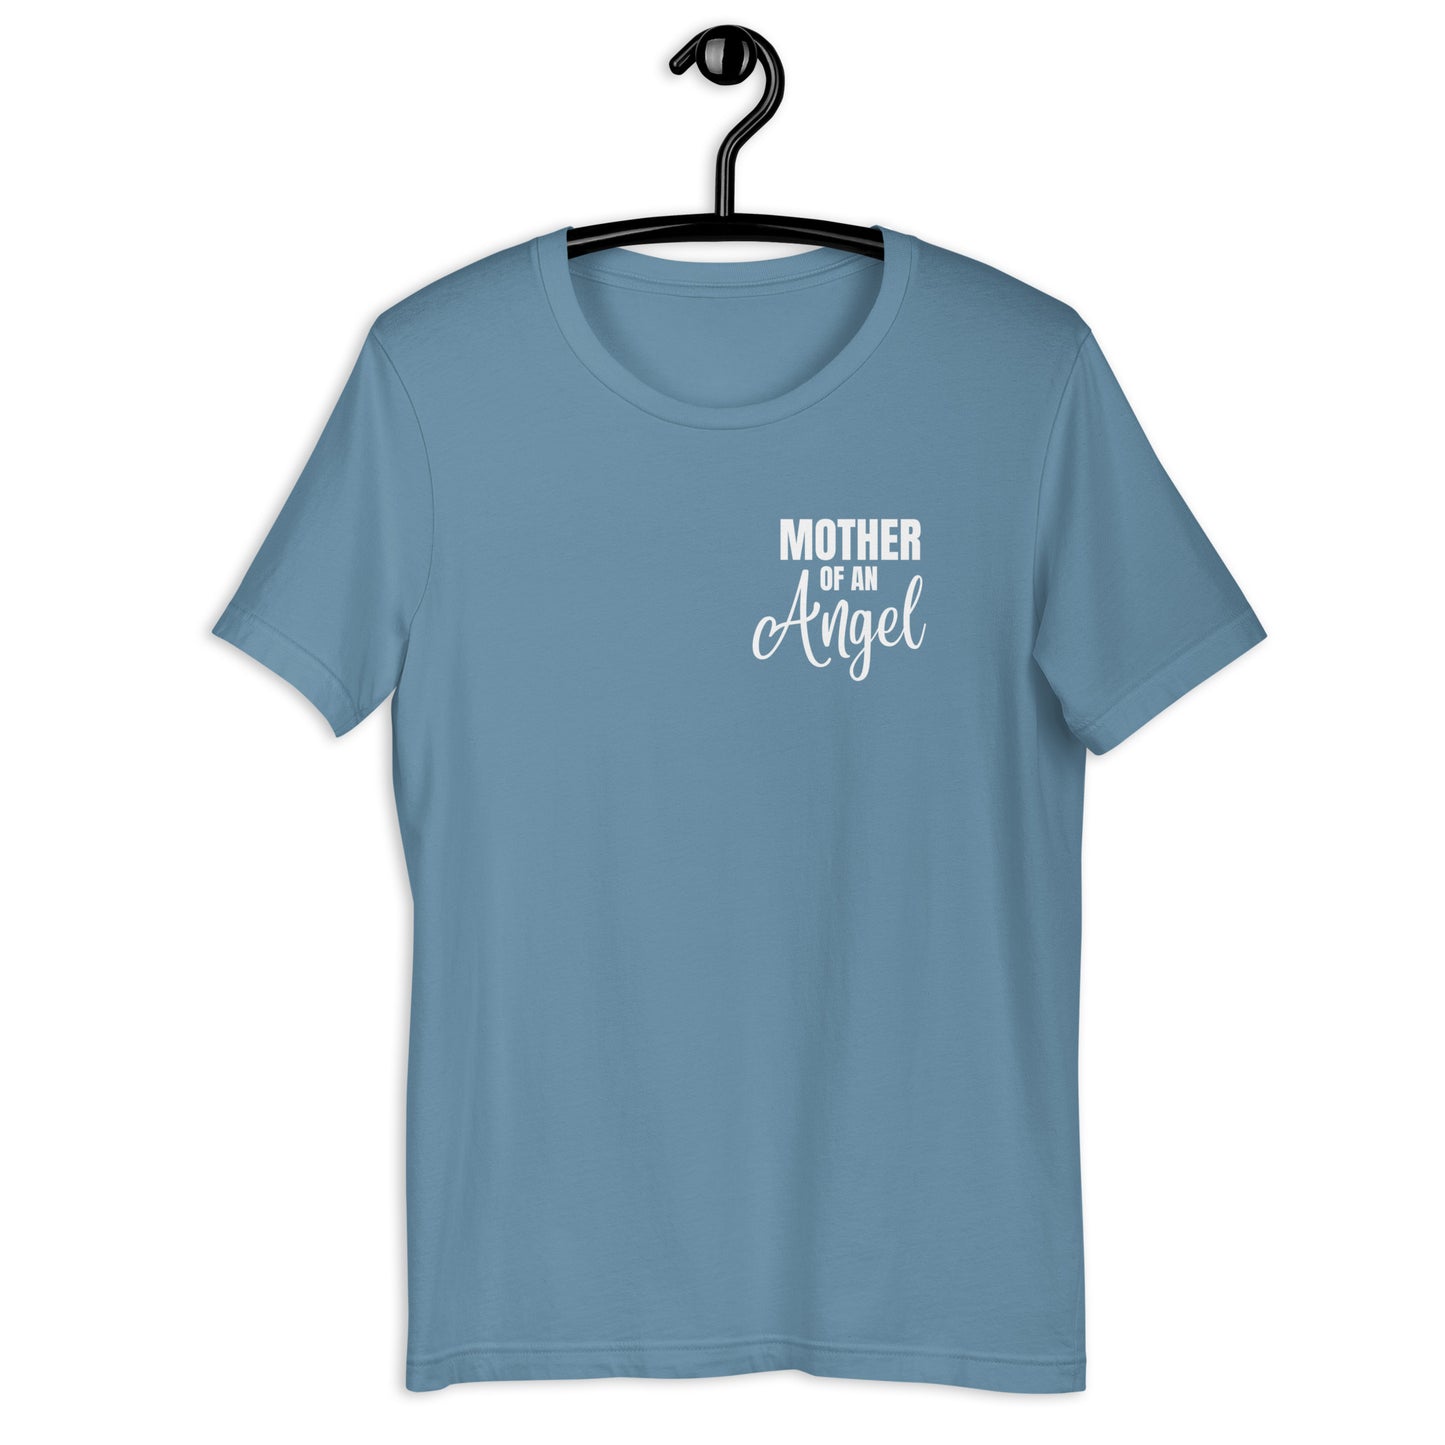 MOTHER OF AN ANGEL TEE - Daughter Of An Angel